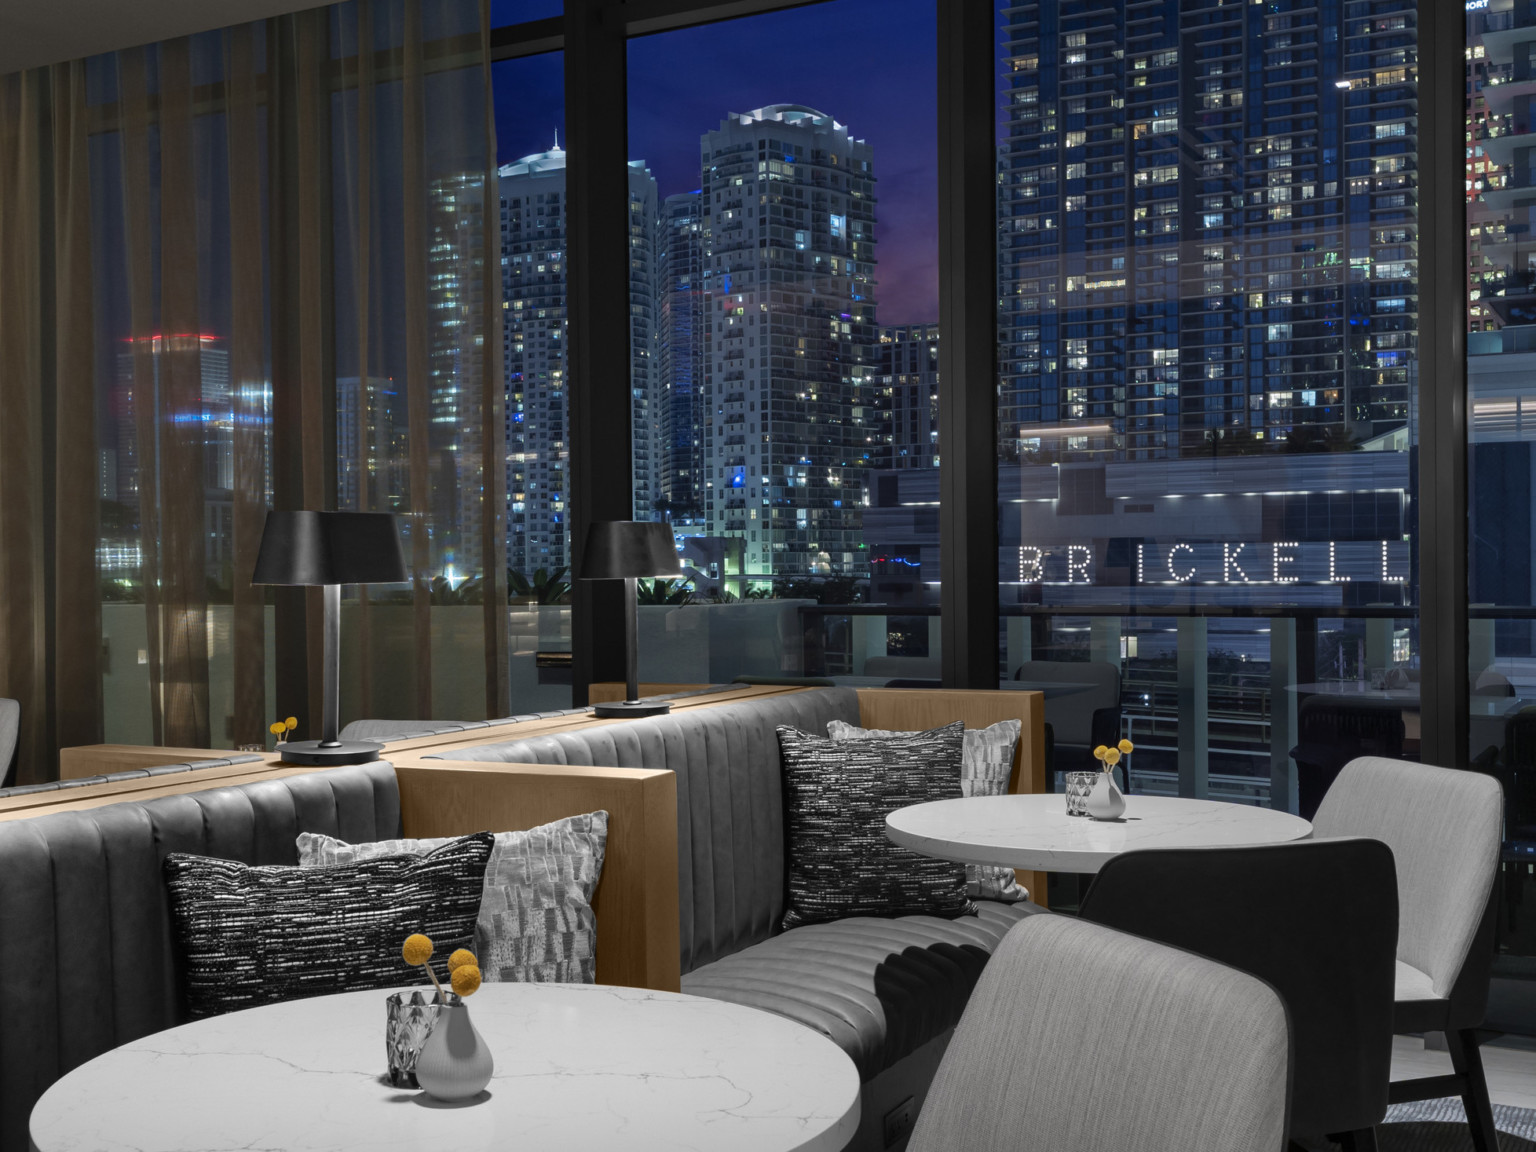 View of the city lights at night through floor to ceiling windows in AC Hotel lounge, mixed booth and chair seating at round white tables